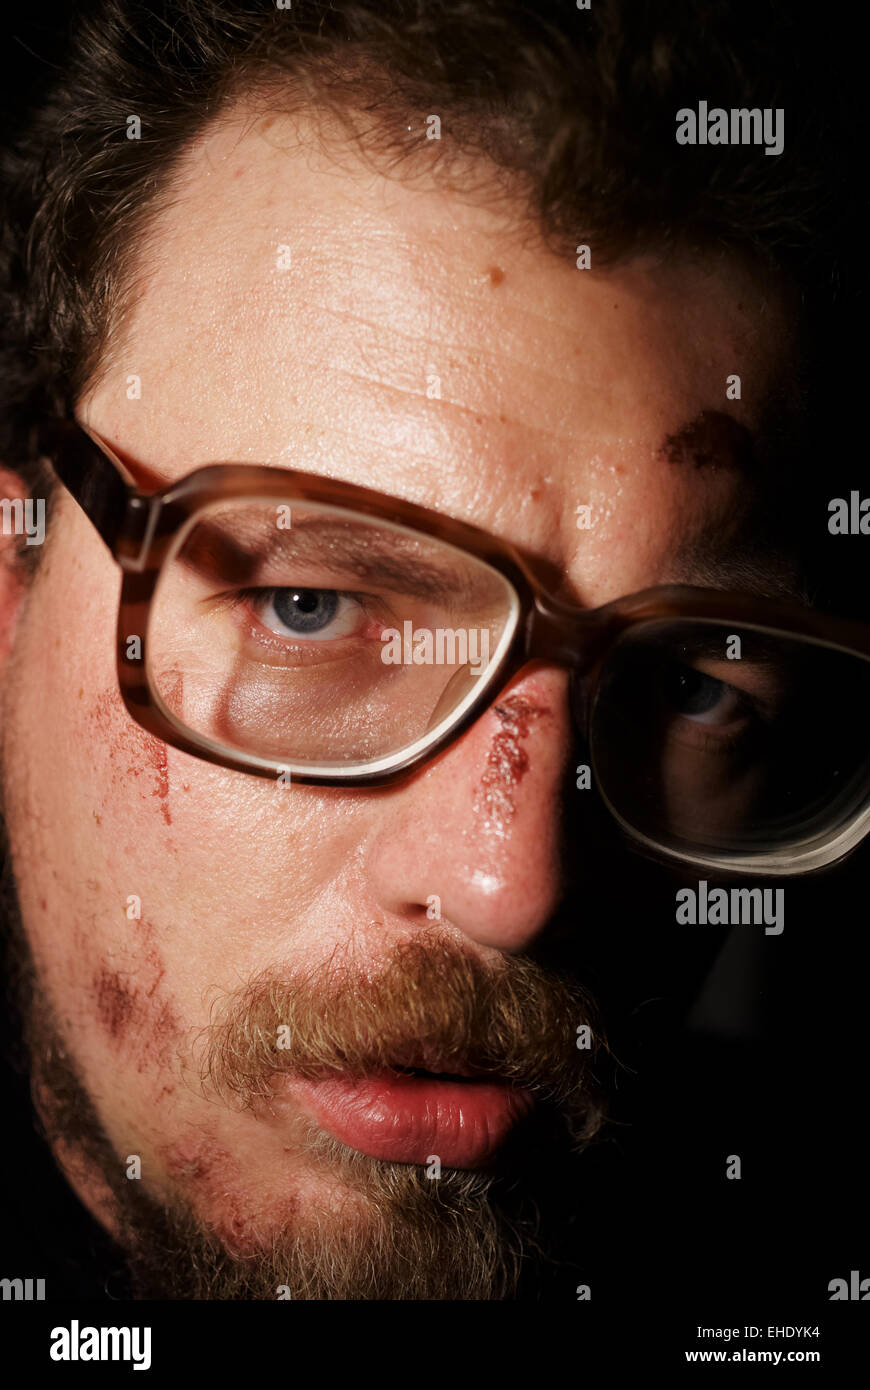 Man on glass with small sores on face Stock Photo